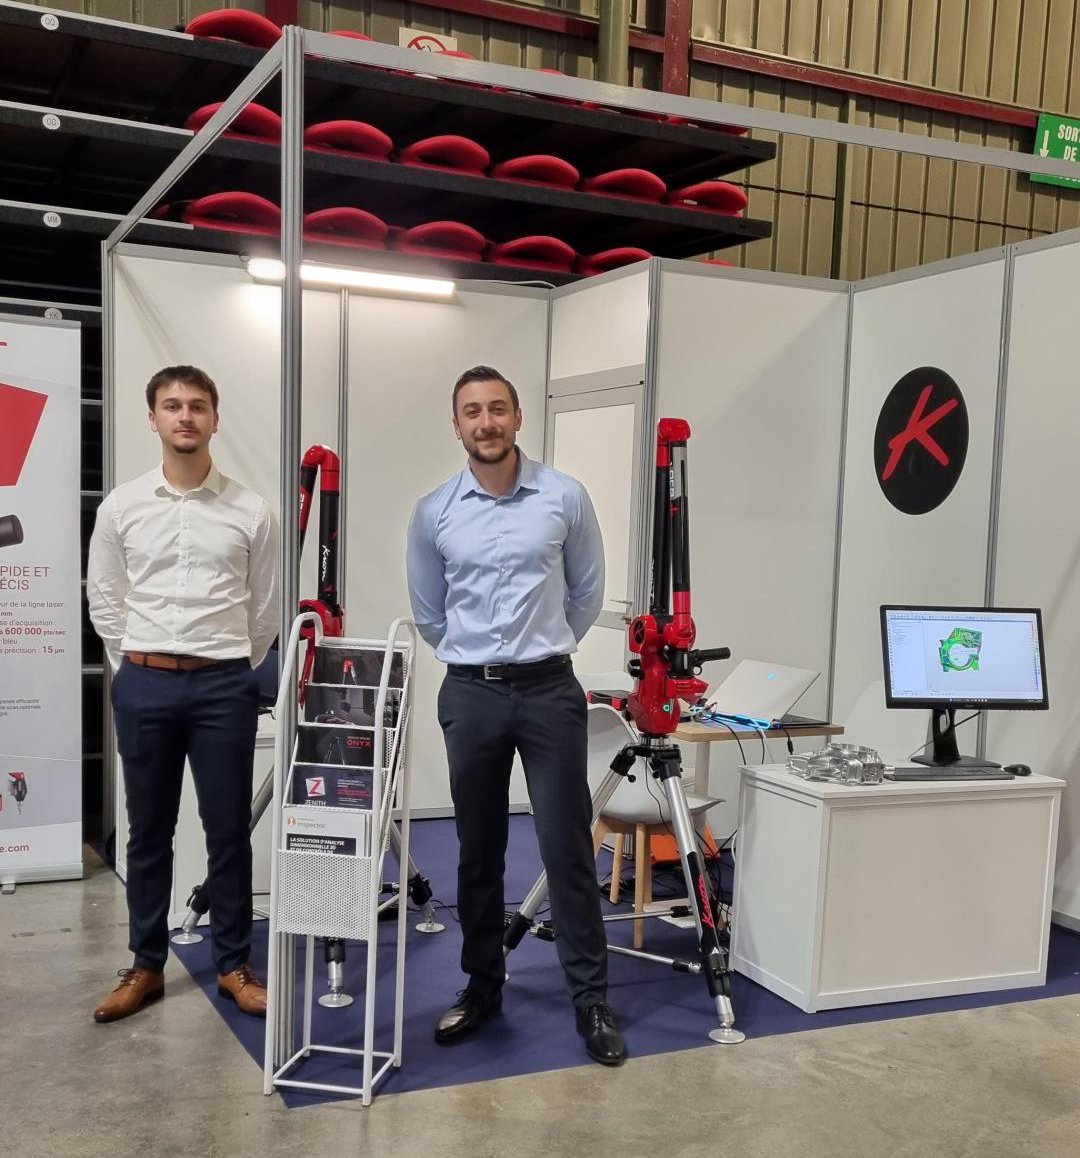 See us at @sepemindustries Martigues

◾Ensure the quality of your products
◾Optimize your production processes

Our team welcomes you at our booth to share their expertise and discuss your specific requirements.

#Kreon #3dscanning #measuringarm #3dmetrology #3dmeasurement #CMM